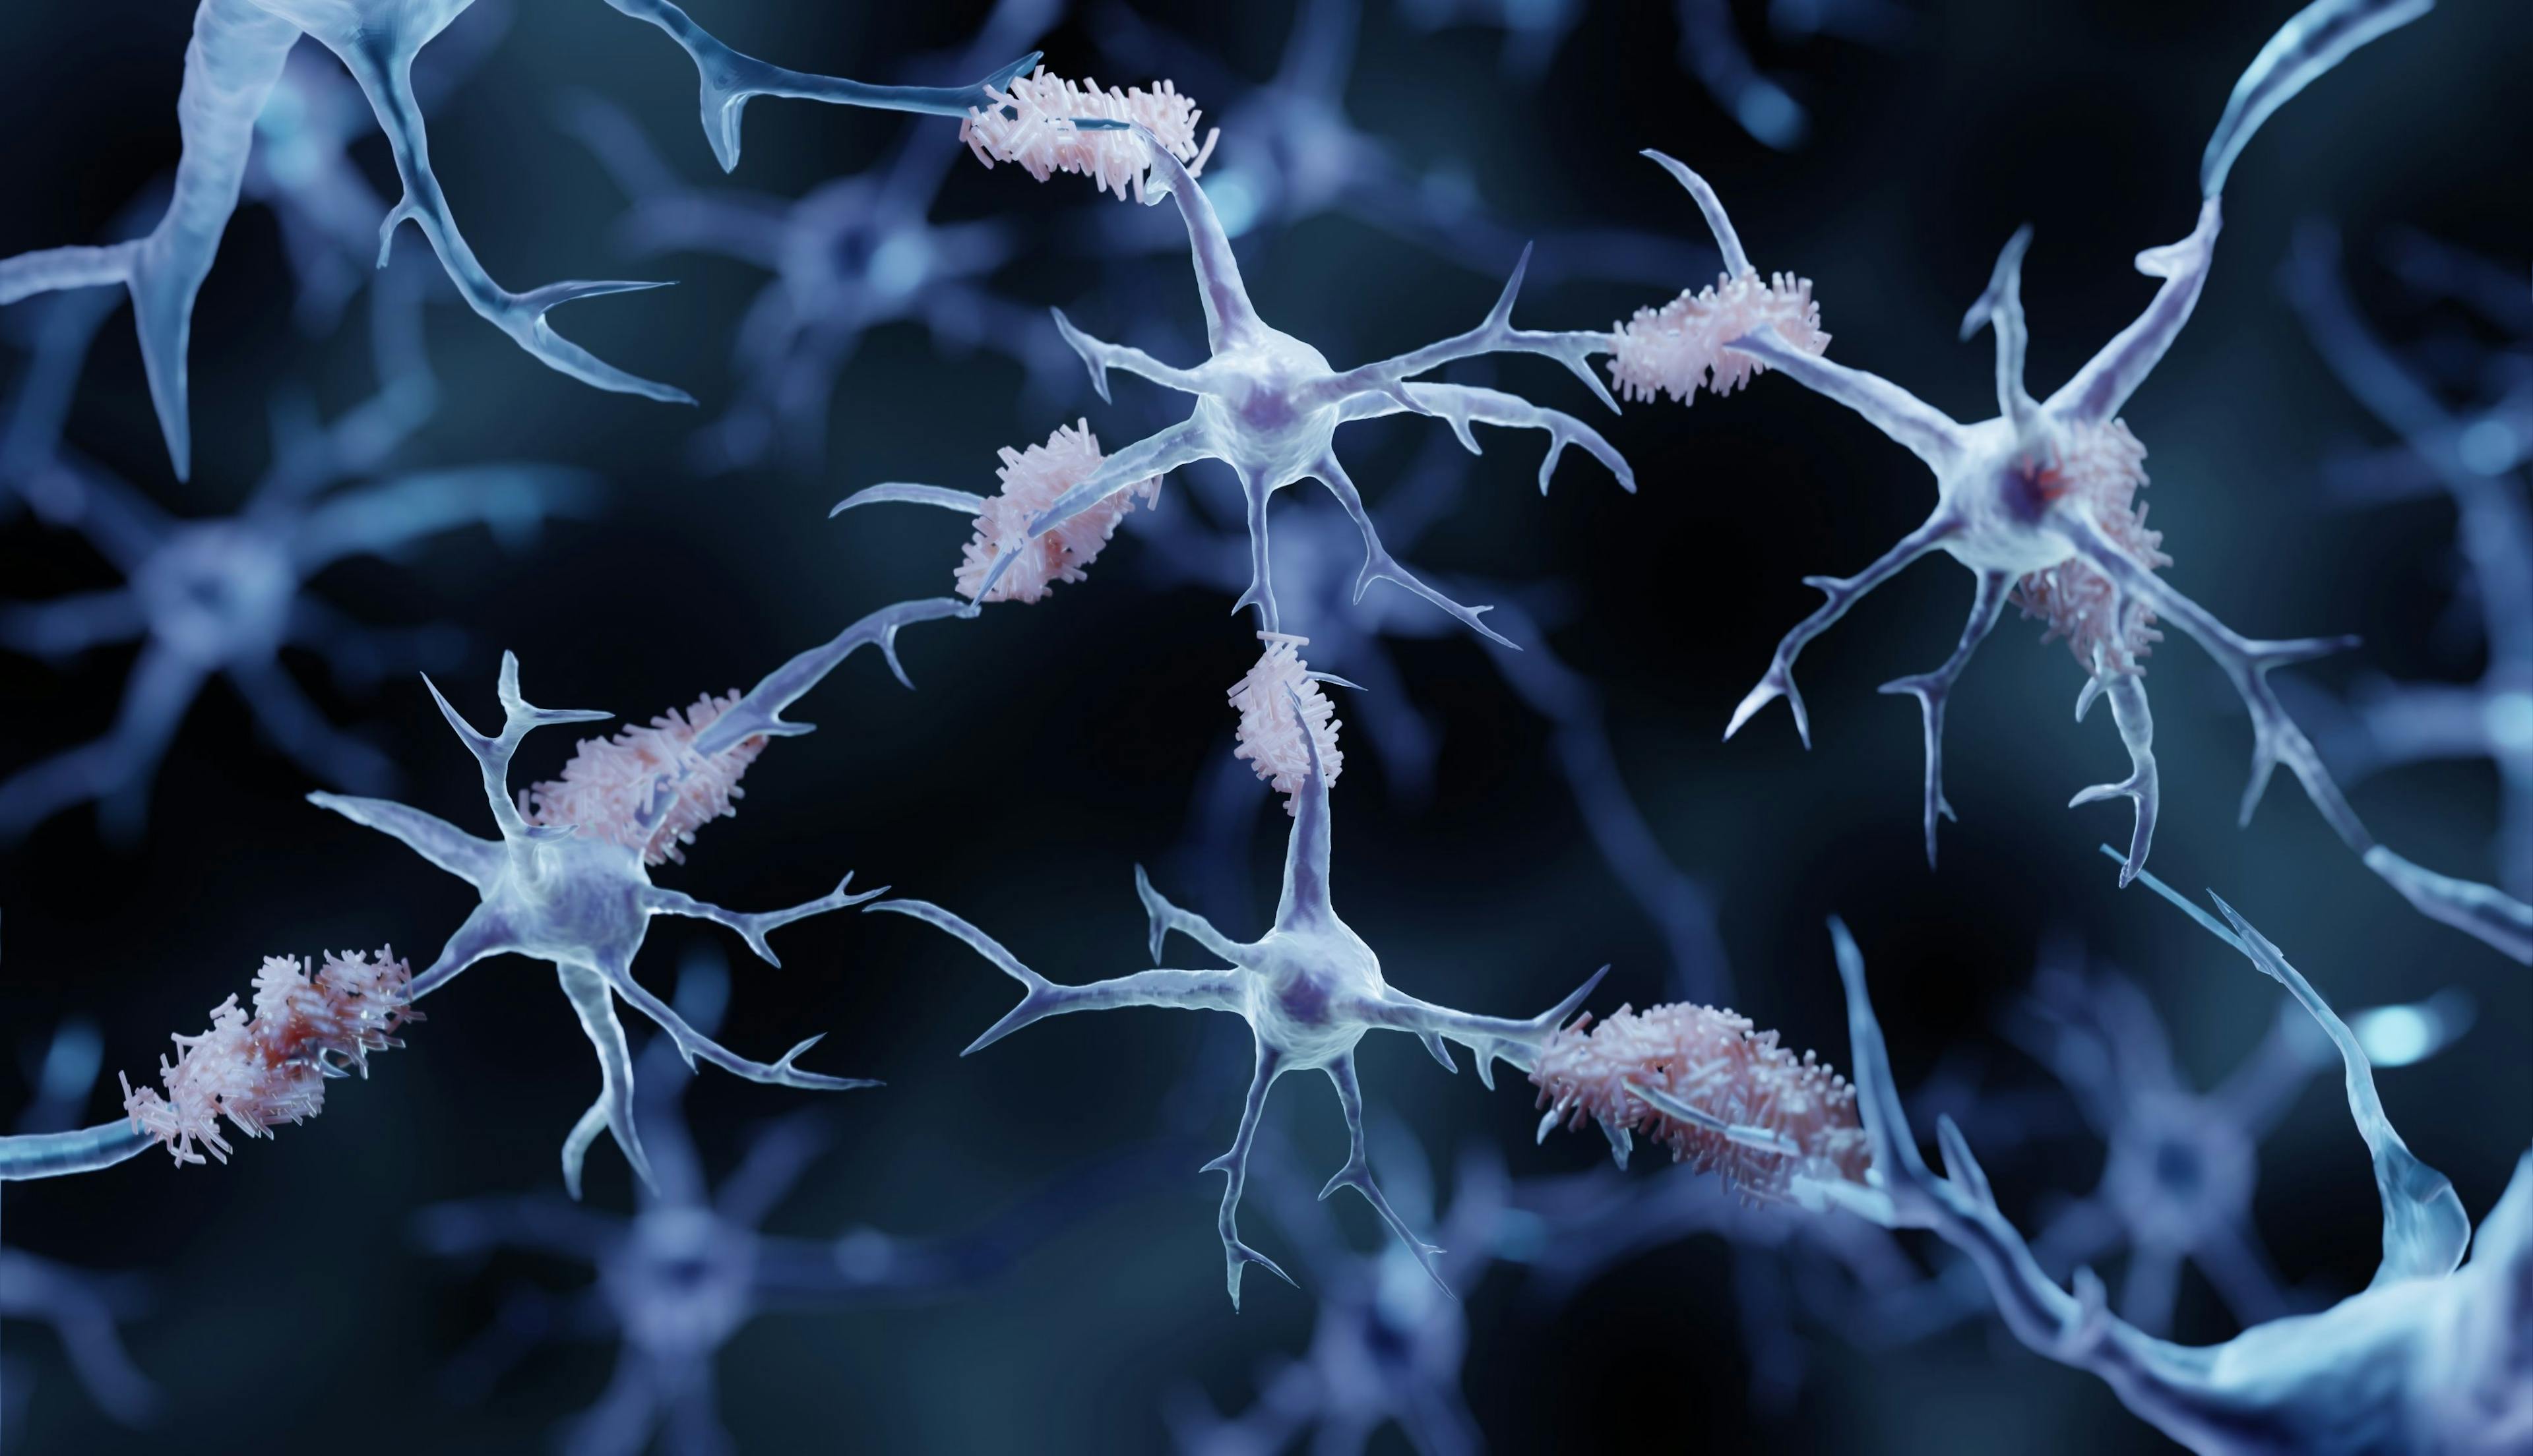 Amyloid plaques in Alzheimer's disease | Image Credit: Artur - stock.adobe.com